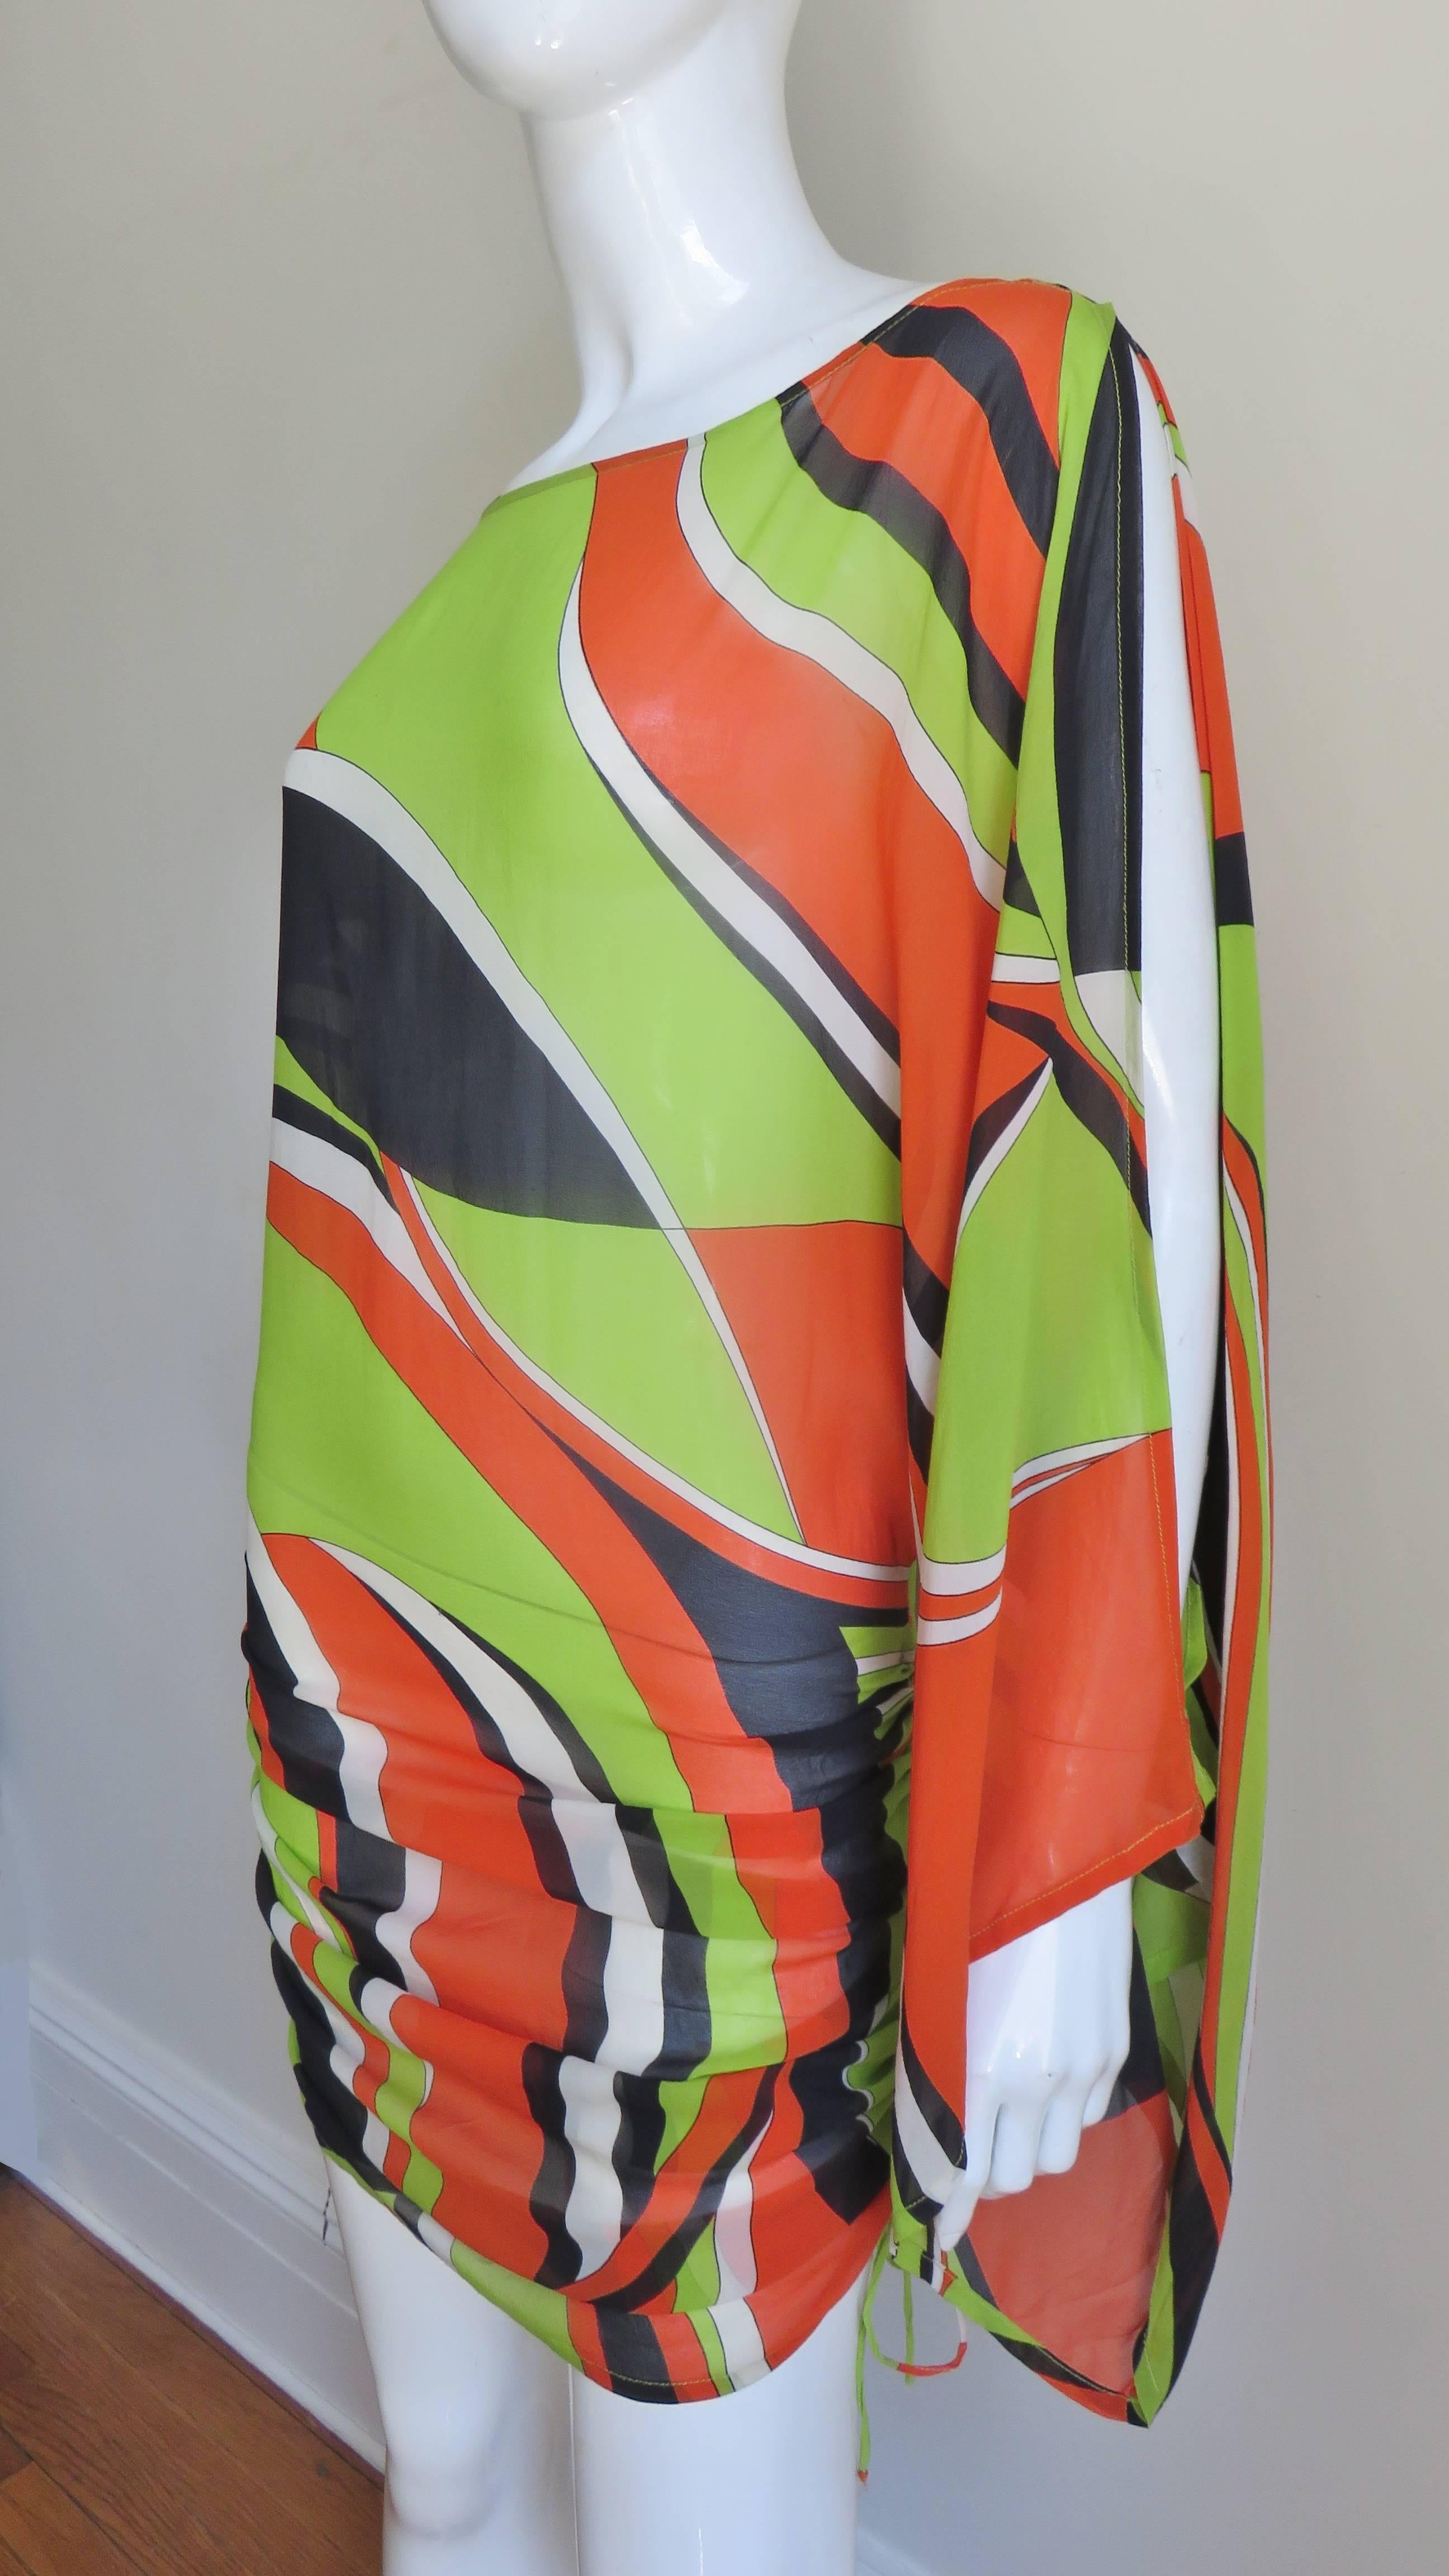 A fabulous silk print dress from French designer Georges Rech in green, orange, black, and white. It has long full kimono sleeves open from the shoulders to the wrists on the outside.  The bodice portion is blouson draping over a straight skirt with